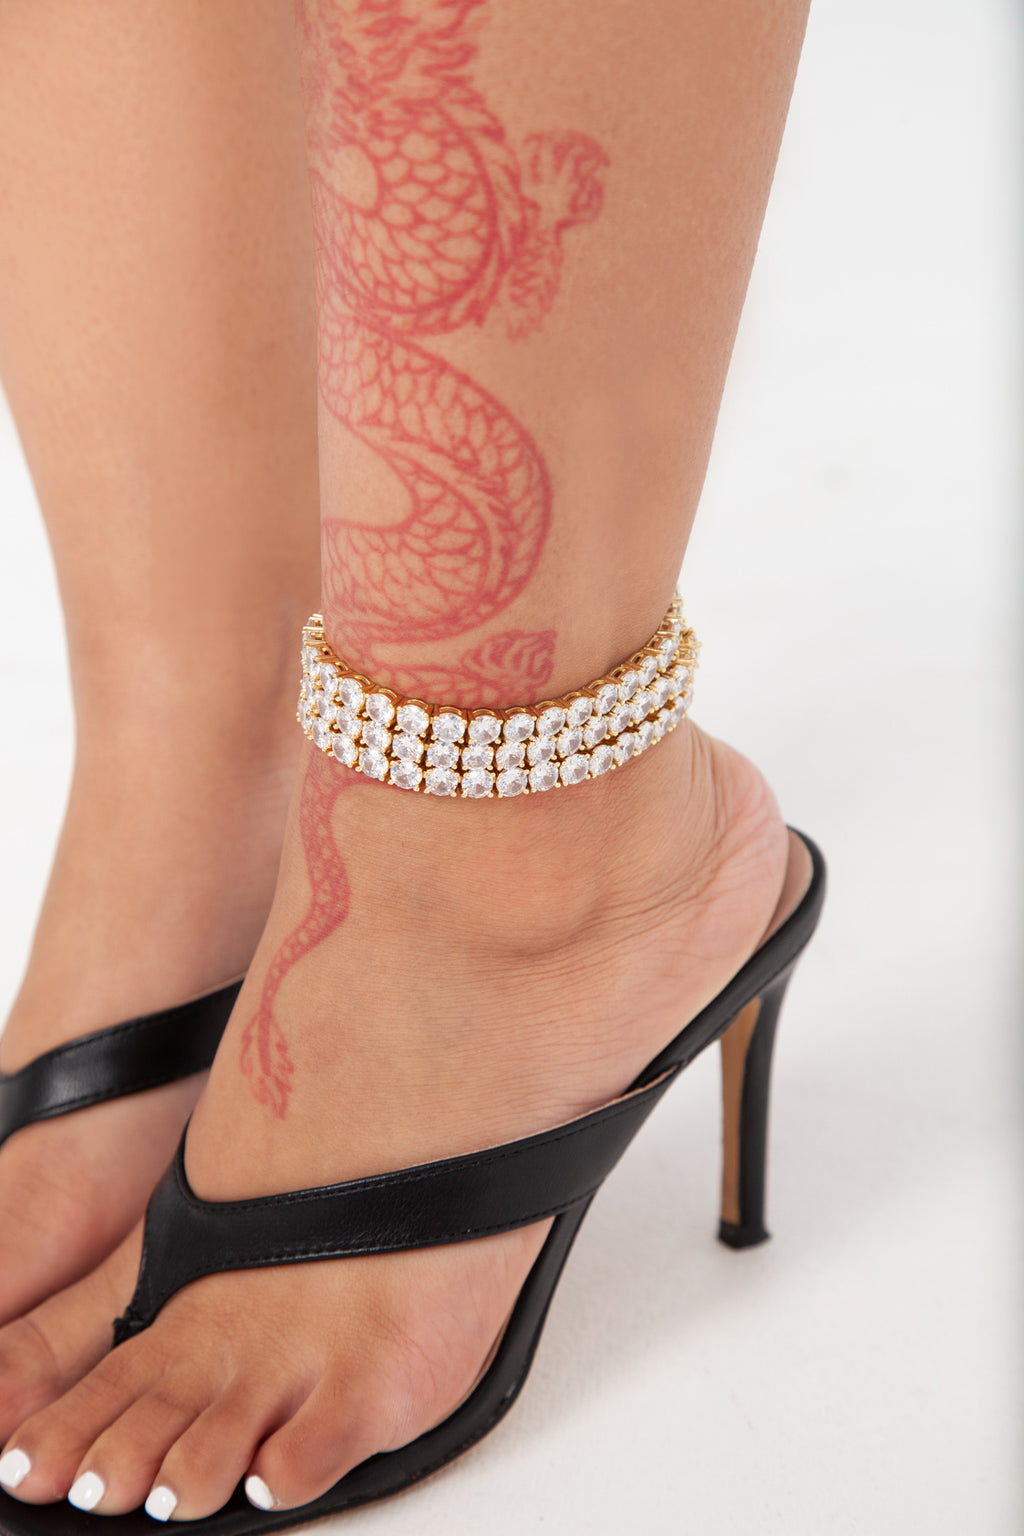 Butterfly Tennis Anklet 14K Gold And Silver Plated 3 mm Foot Bracelet – JB  Jewelry BLVD